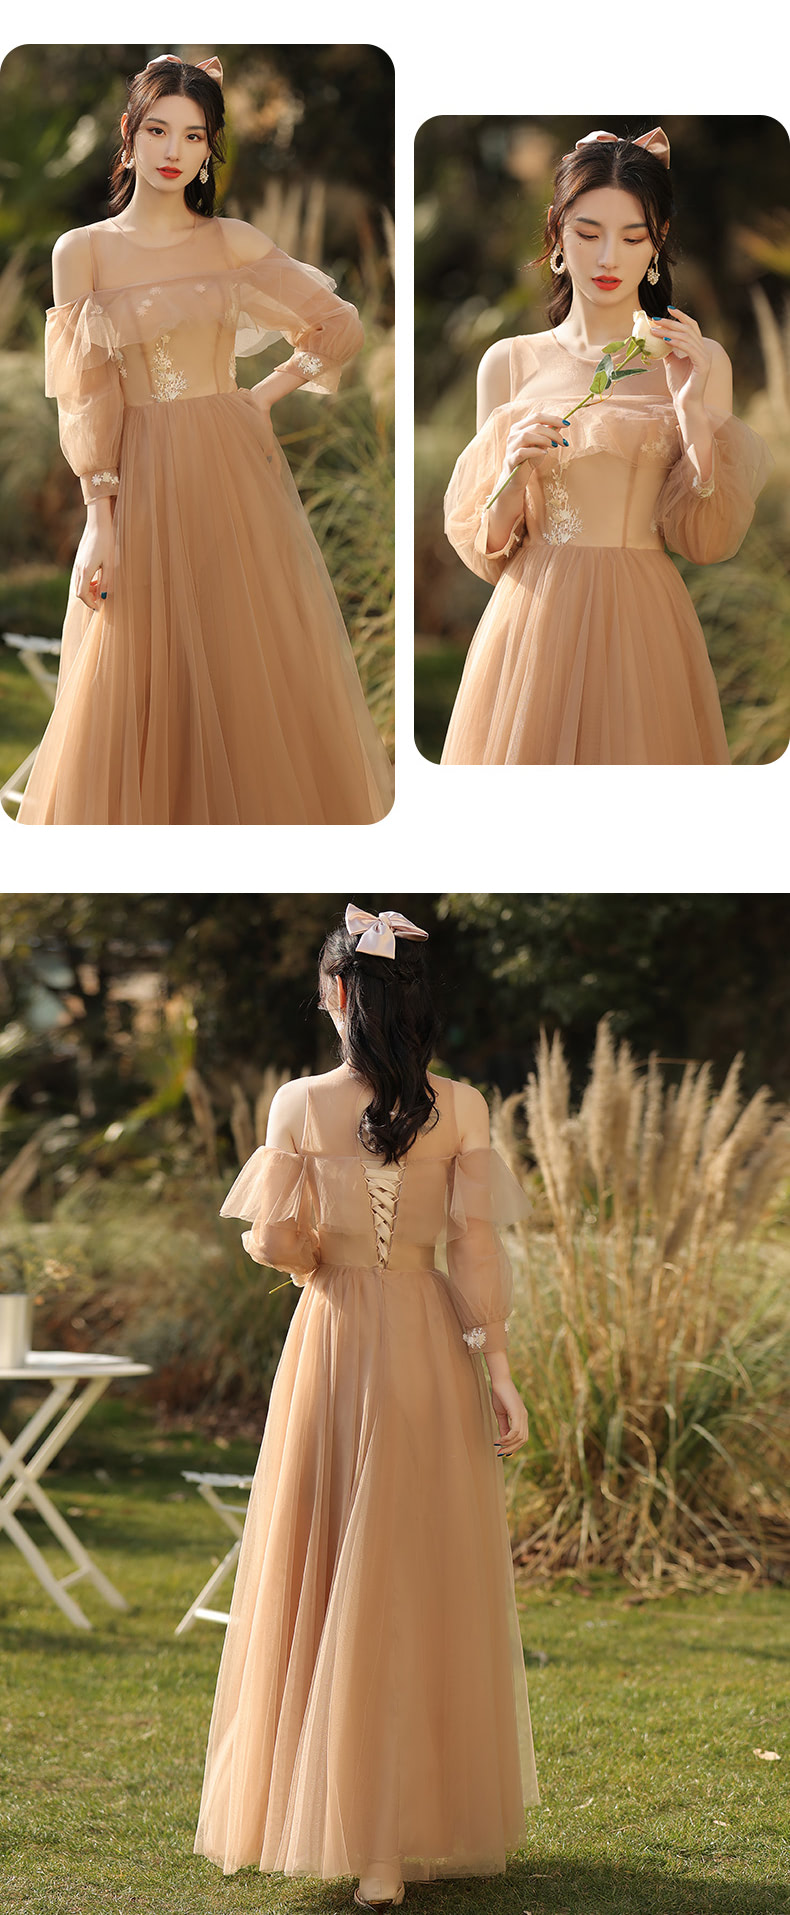 Fairy-Champagne-Bridesmaid-Long-Dress-Sweet-Evening-Formal-Gown21.jpg